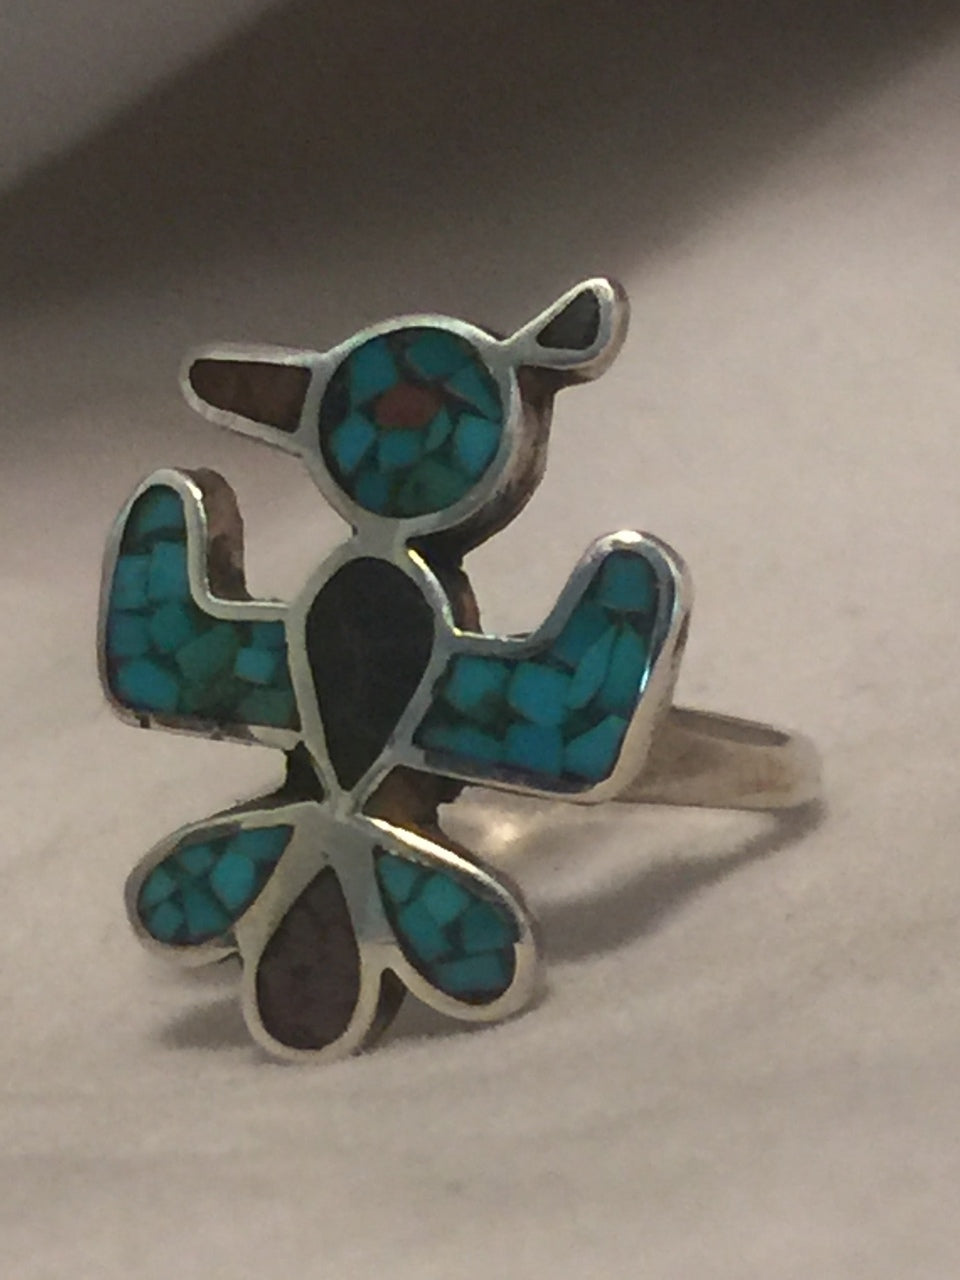 Vintage Sterling Silver Southwest Tribal Turquoise & Coral Chip Bird Ring Size 6.5 4.1g